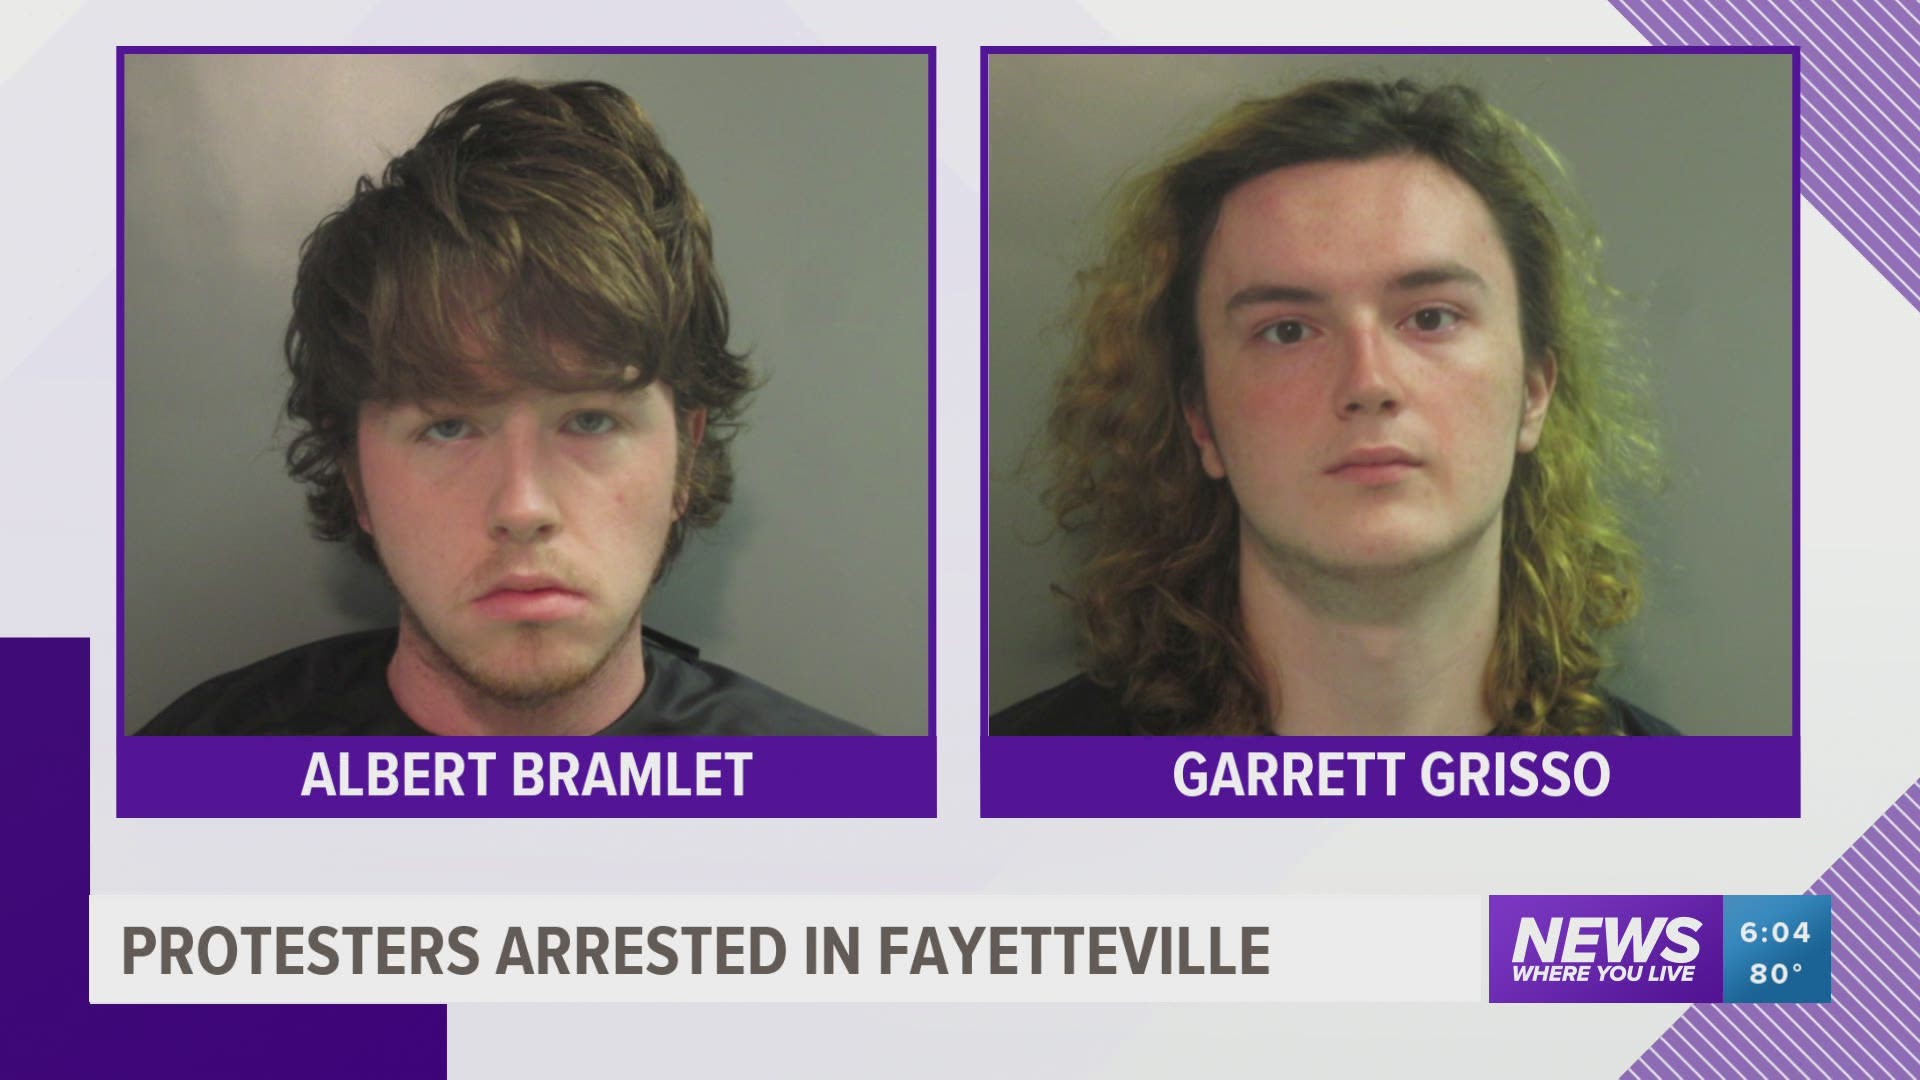 Protesters arrested in Fayetteville